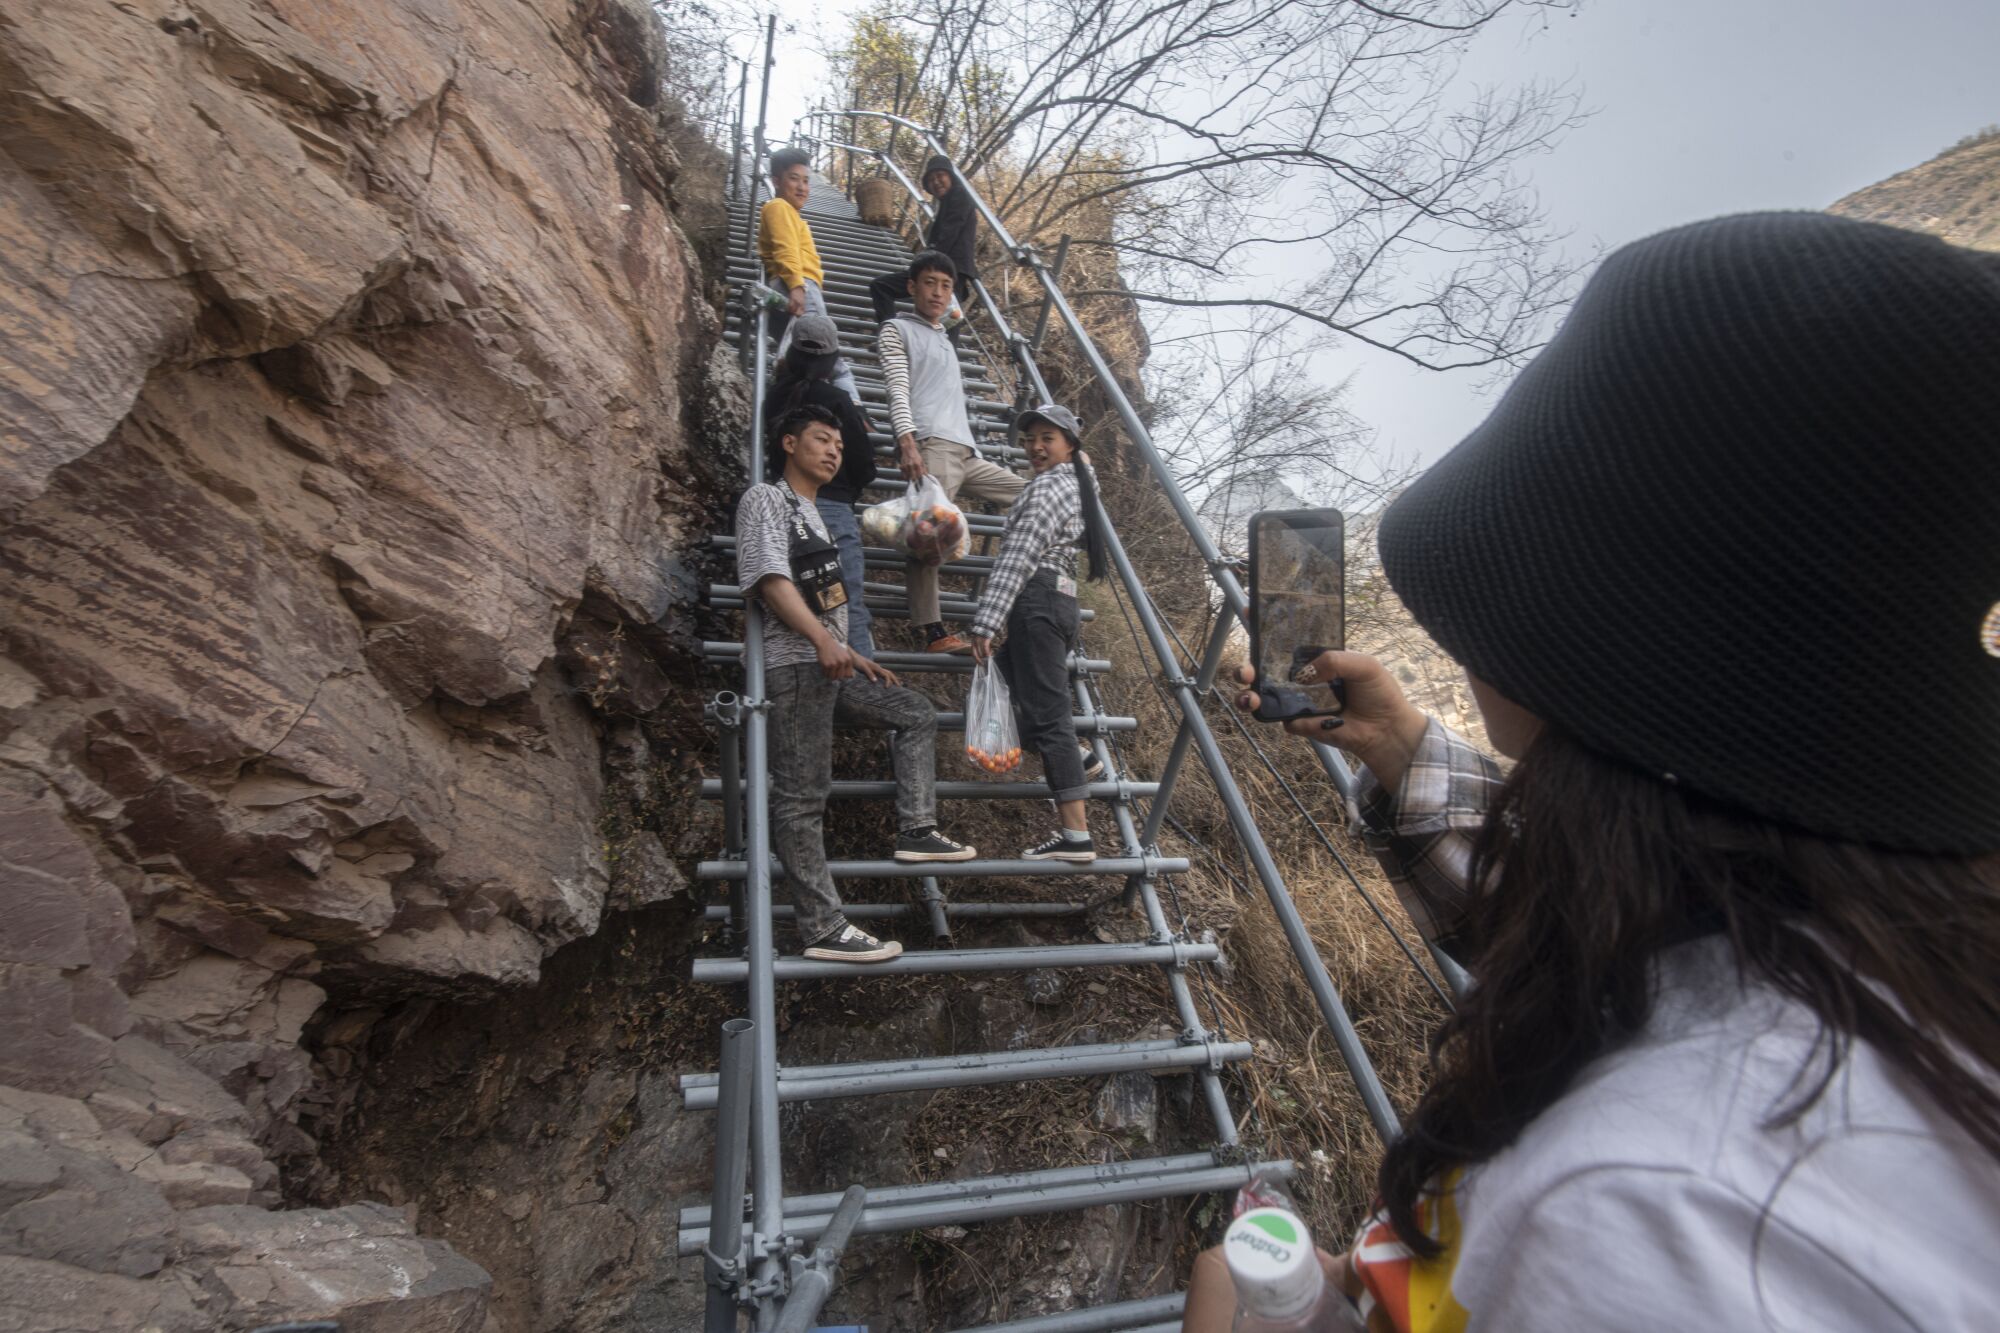 A young woman uses her cellphone to take a picture of young people standing on metal steps 